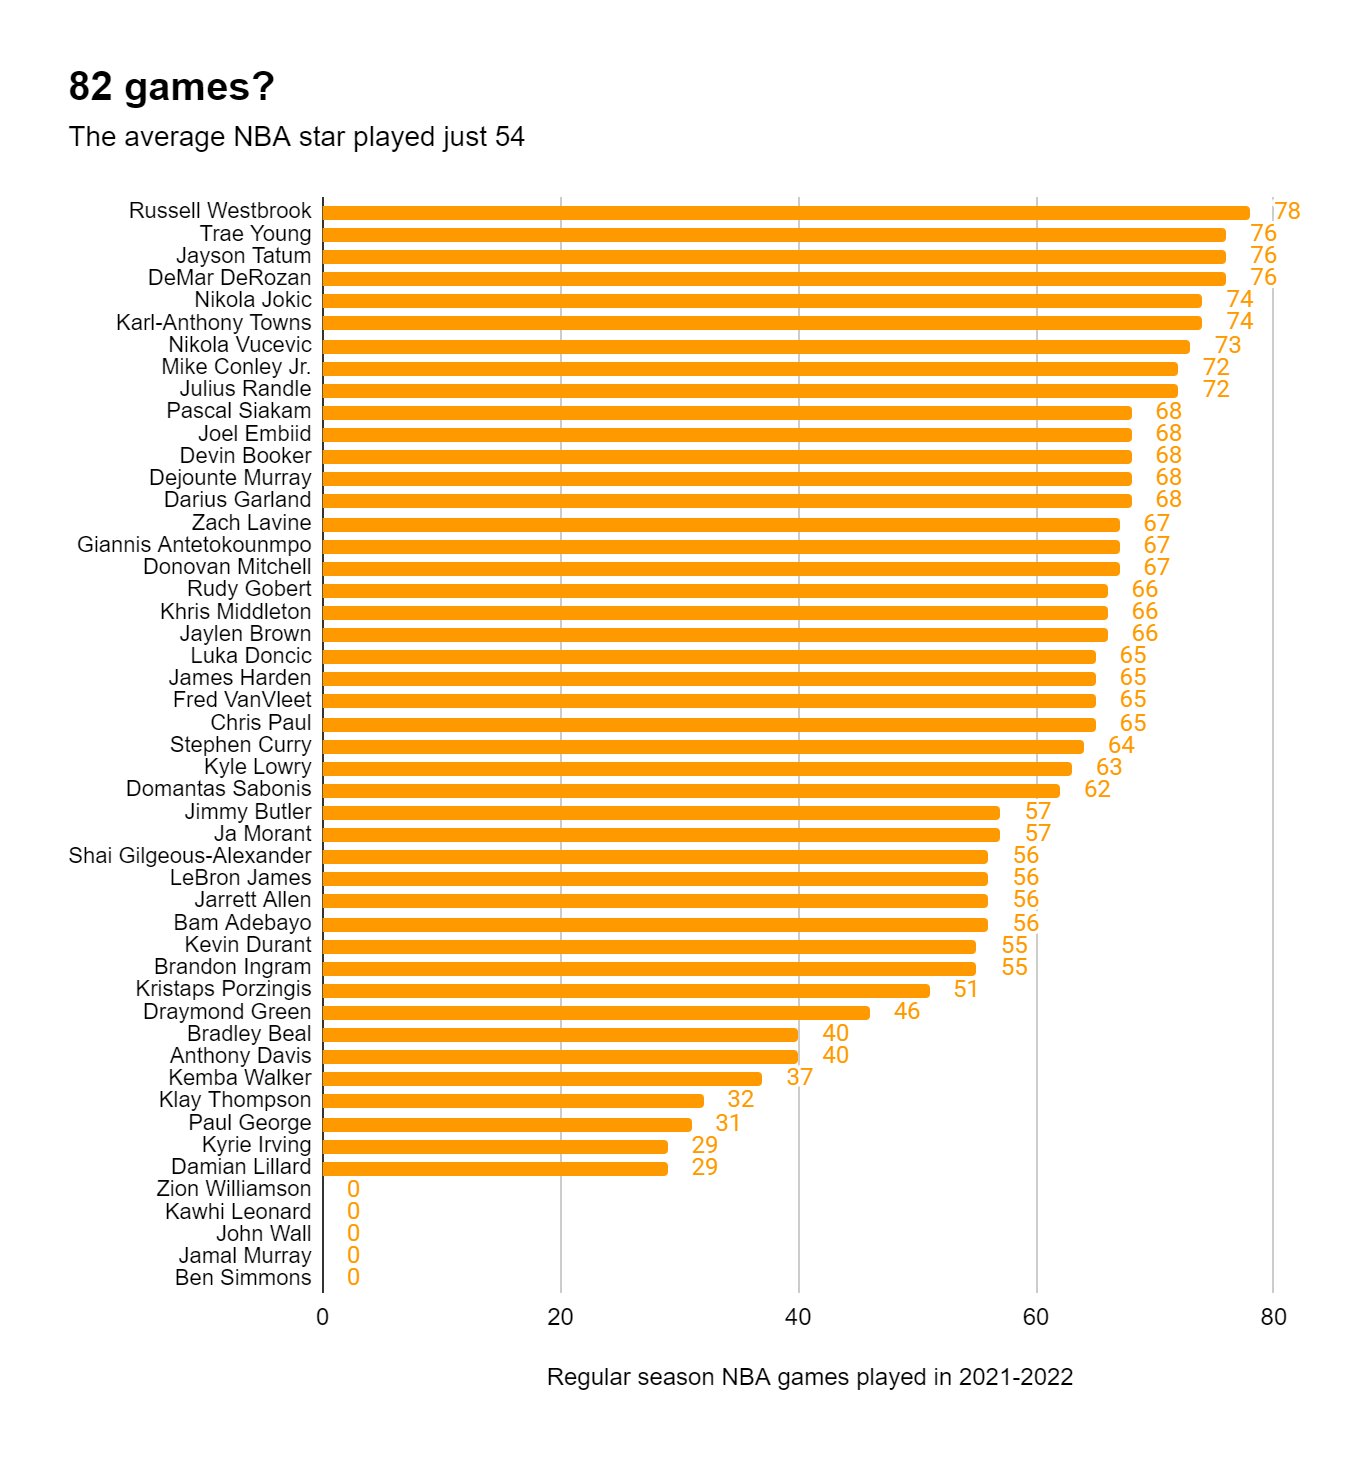 NBA stars missed an average of 28 games